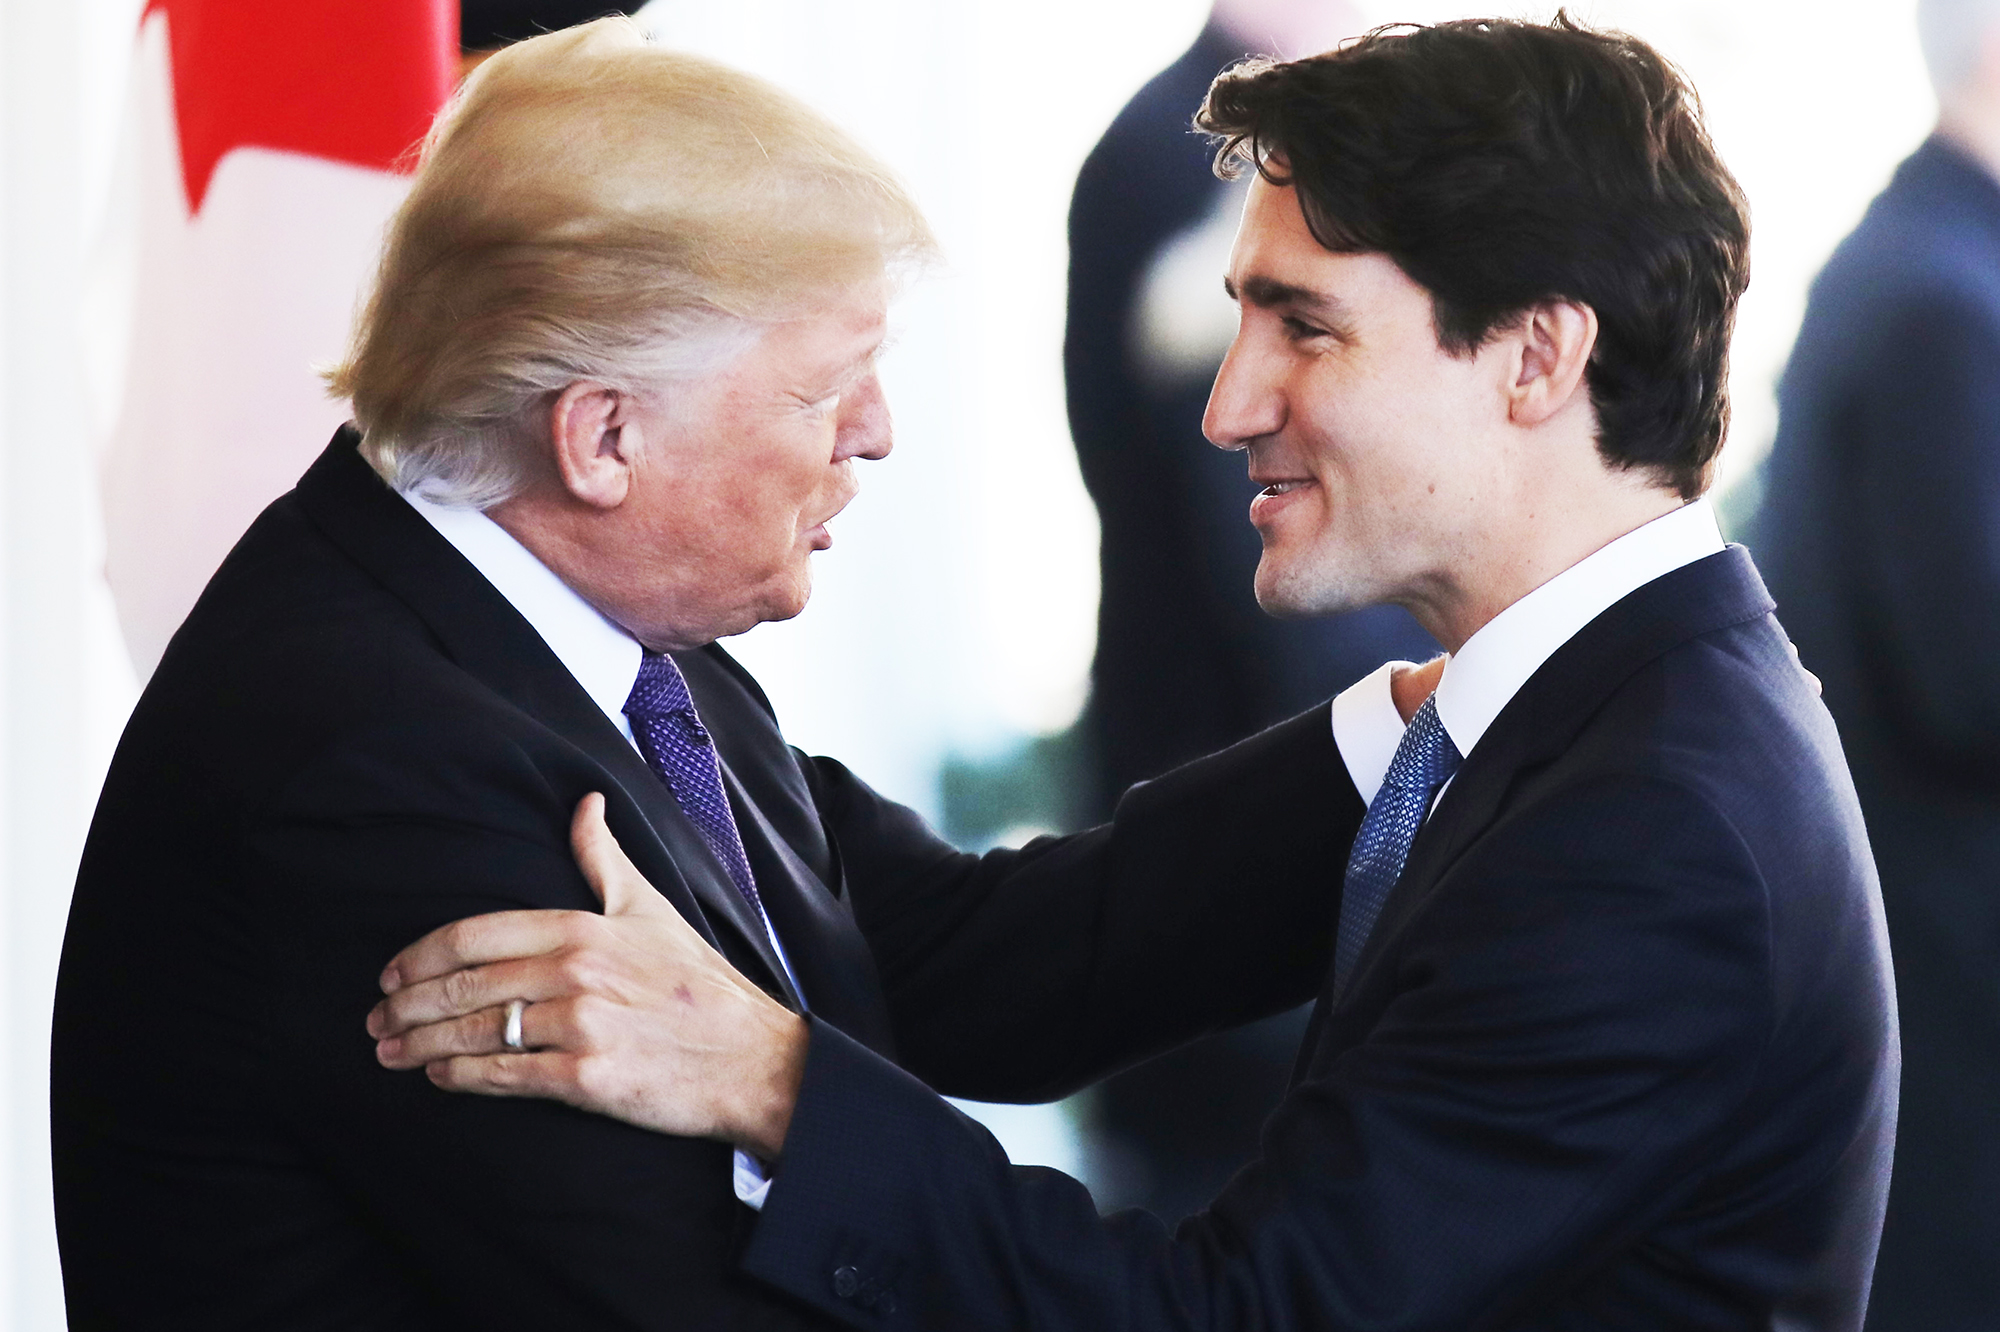 Canadian Prime Minister Justin Trudeau  beat  Donald Trump's dominant handshake while bracing each other in Washington, D.C., on Feb. 13, 2017.